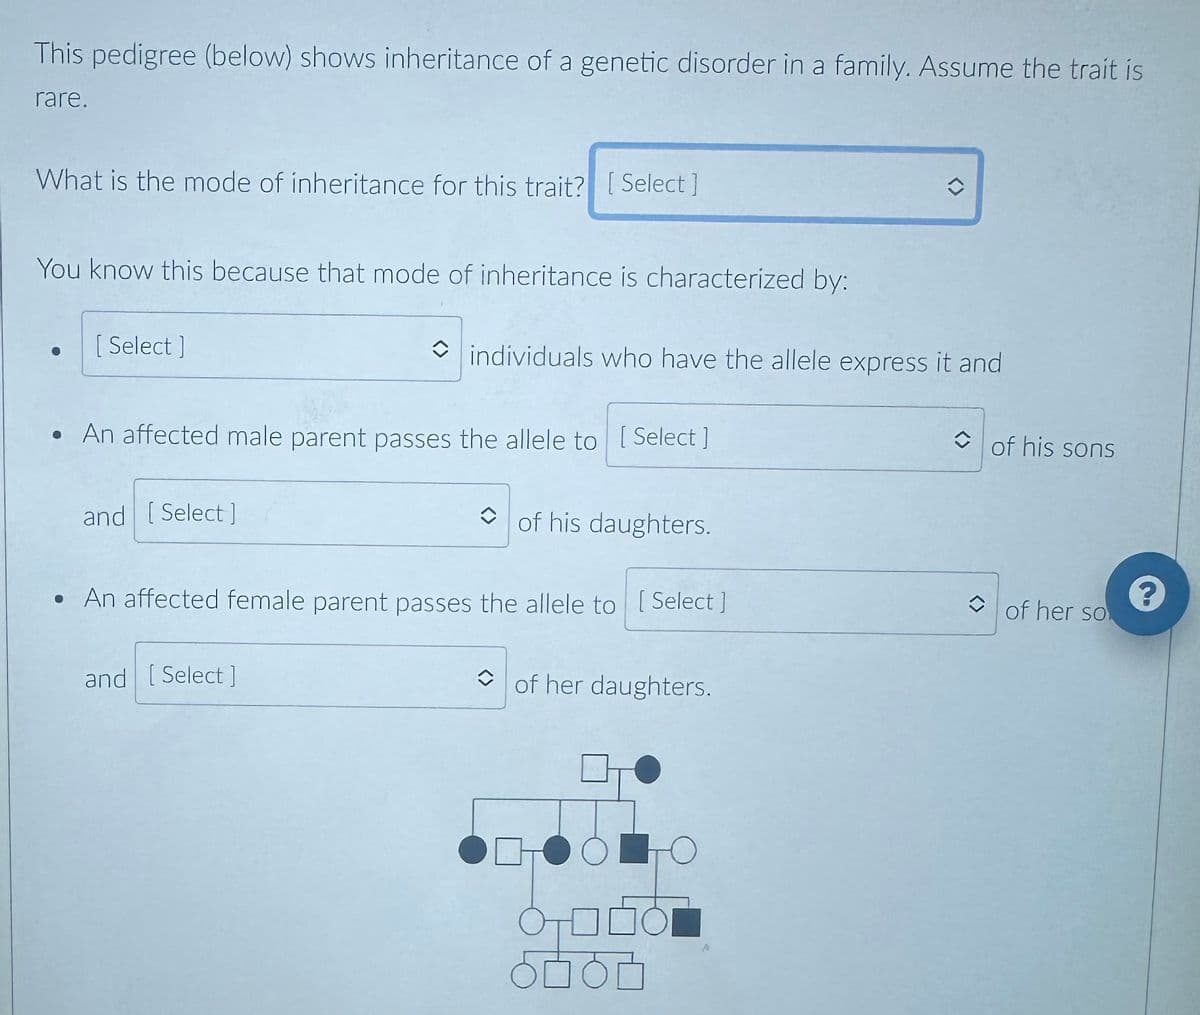 This pedigree (below) shows inheritance of a genetic disorder in a family. Assume the trait is
rare.
What is the mode of inheritance for this trait? [Select]
You know this because that mode of inheritance is characterized by:
[ Select]
• An affected male parent passes the allele to [Select]
and [Select]
individuals who have the allele express it and
and [Select]
of his daughters.
• An affected female parent passes the allele to [Select]
of her daughters.
ㅇㅁㅇㅁ
î
то
◆
of his sons
of her so
?